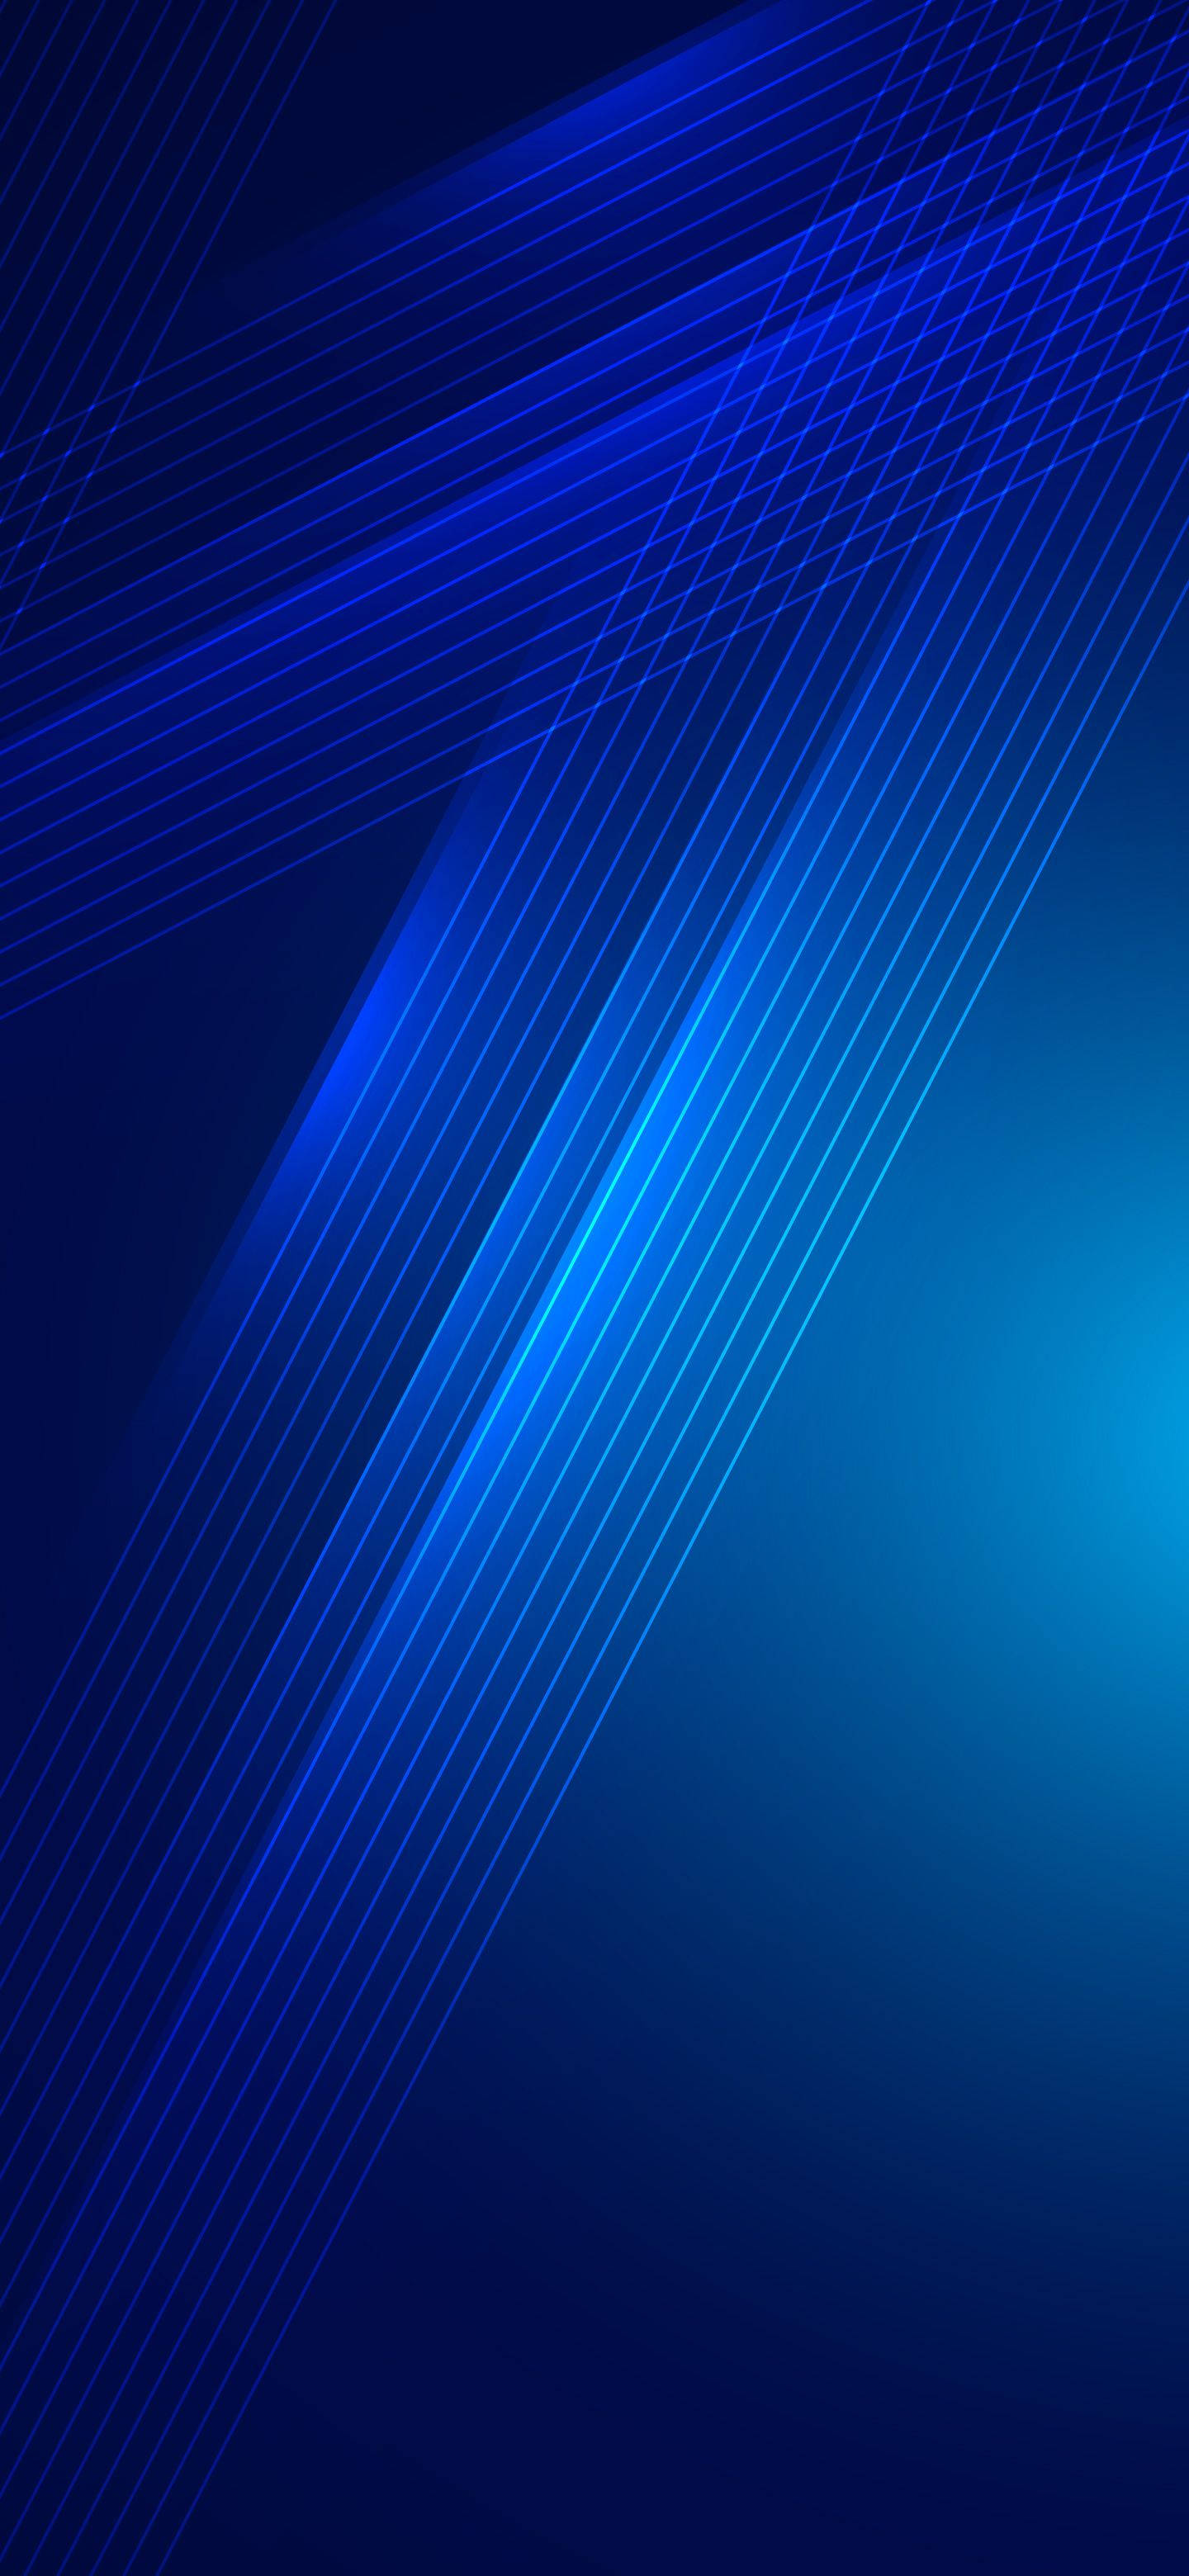 Free Blue Wallpaper Downloads, [1700+] Blue Wallpapers for FREE | Wallpapers .com